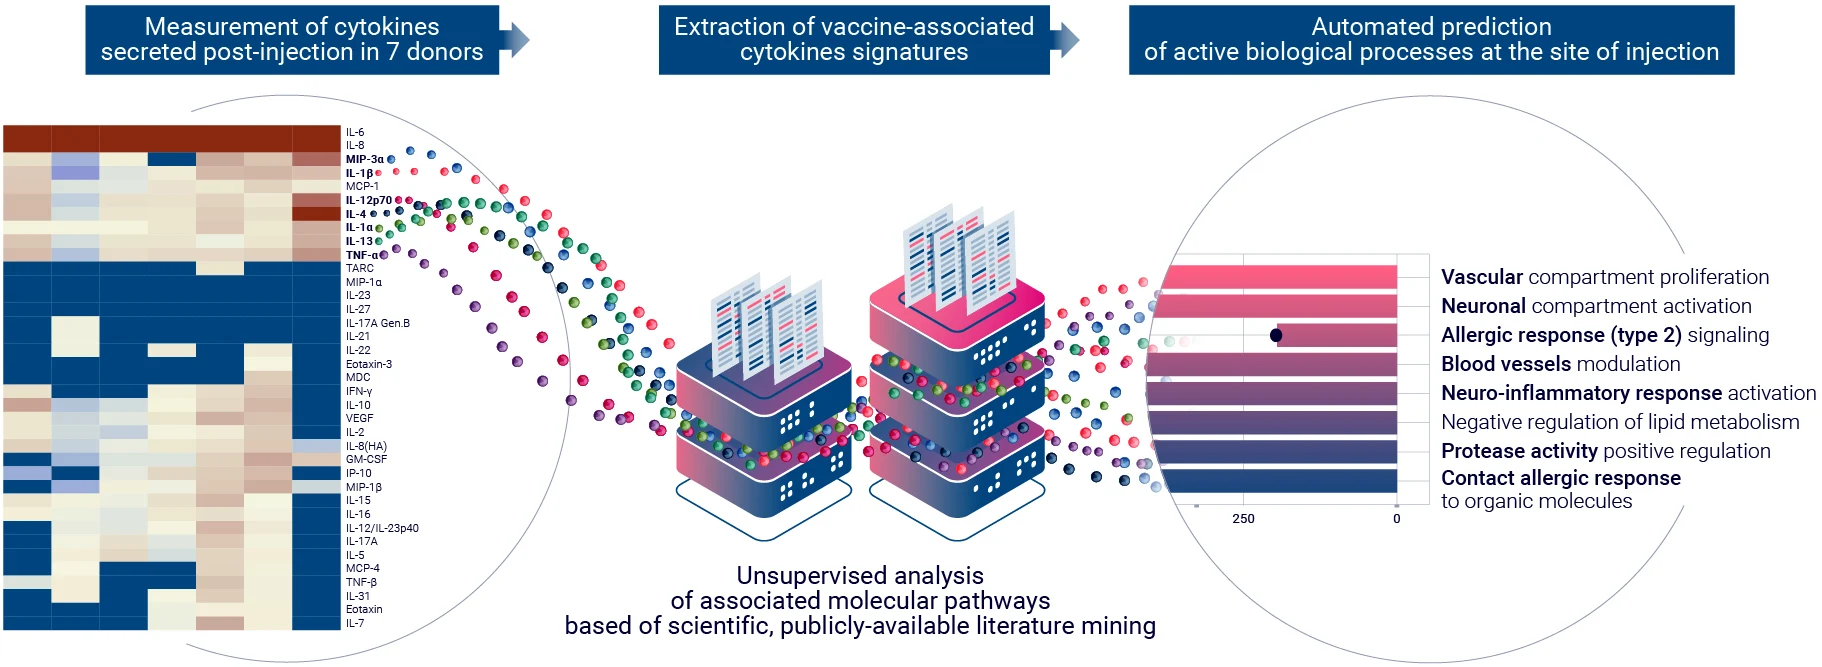 Evaluation of the vaccine candidate immunogenicity at the tissue level using multiplex cytokine analysis and bioinformatics.